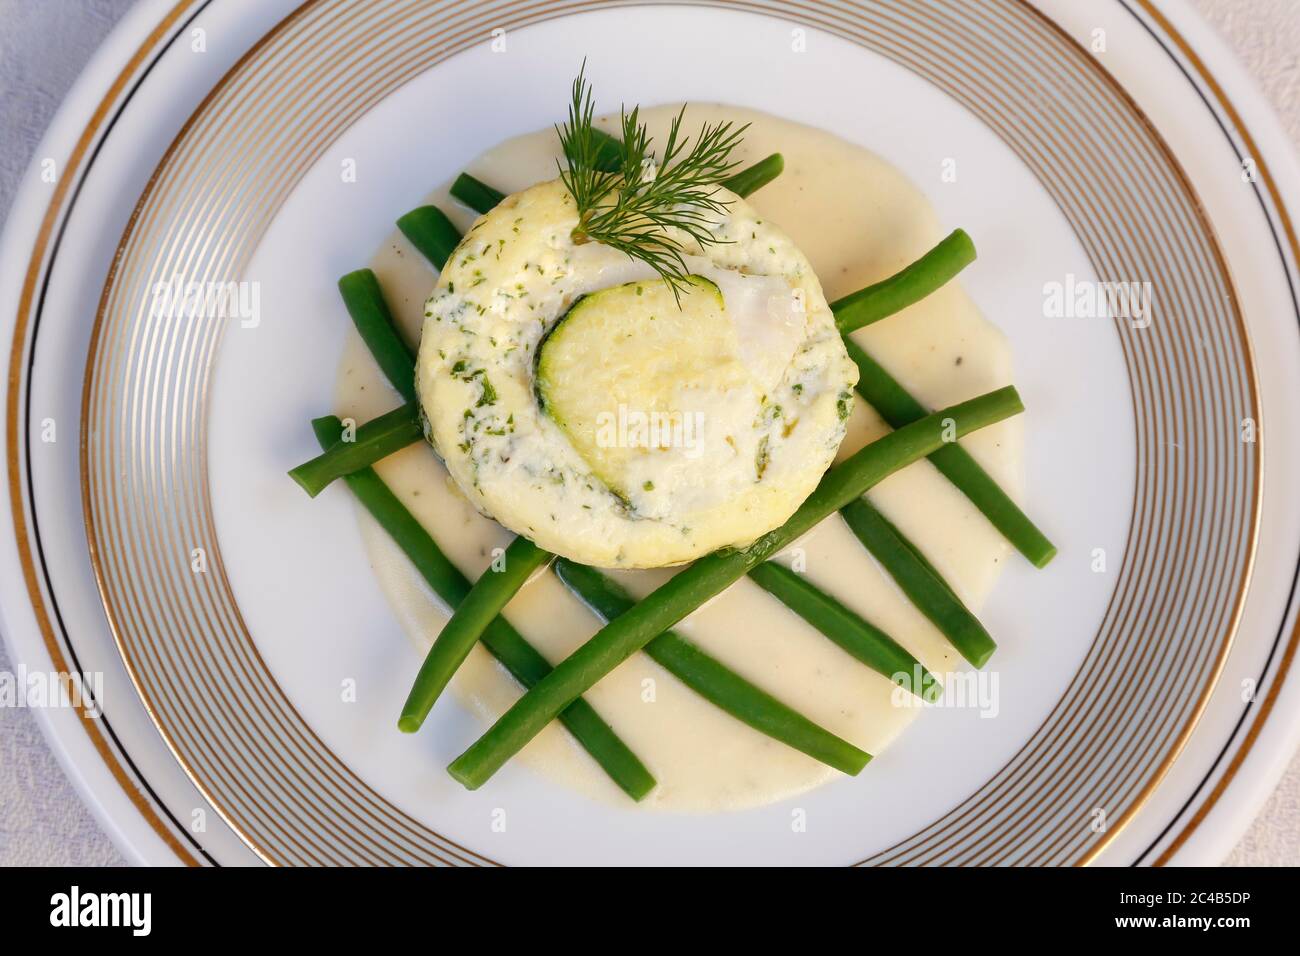 Swabian cuisine, Ofenschlupfer with pike-perch, green beans with sauce arranged on plates, dill, Germany Stock Photo